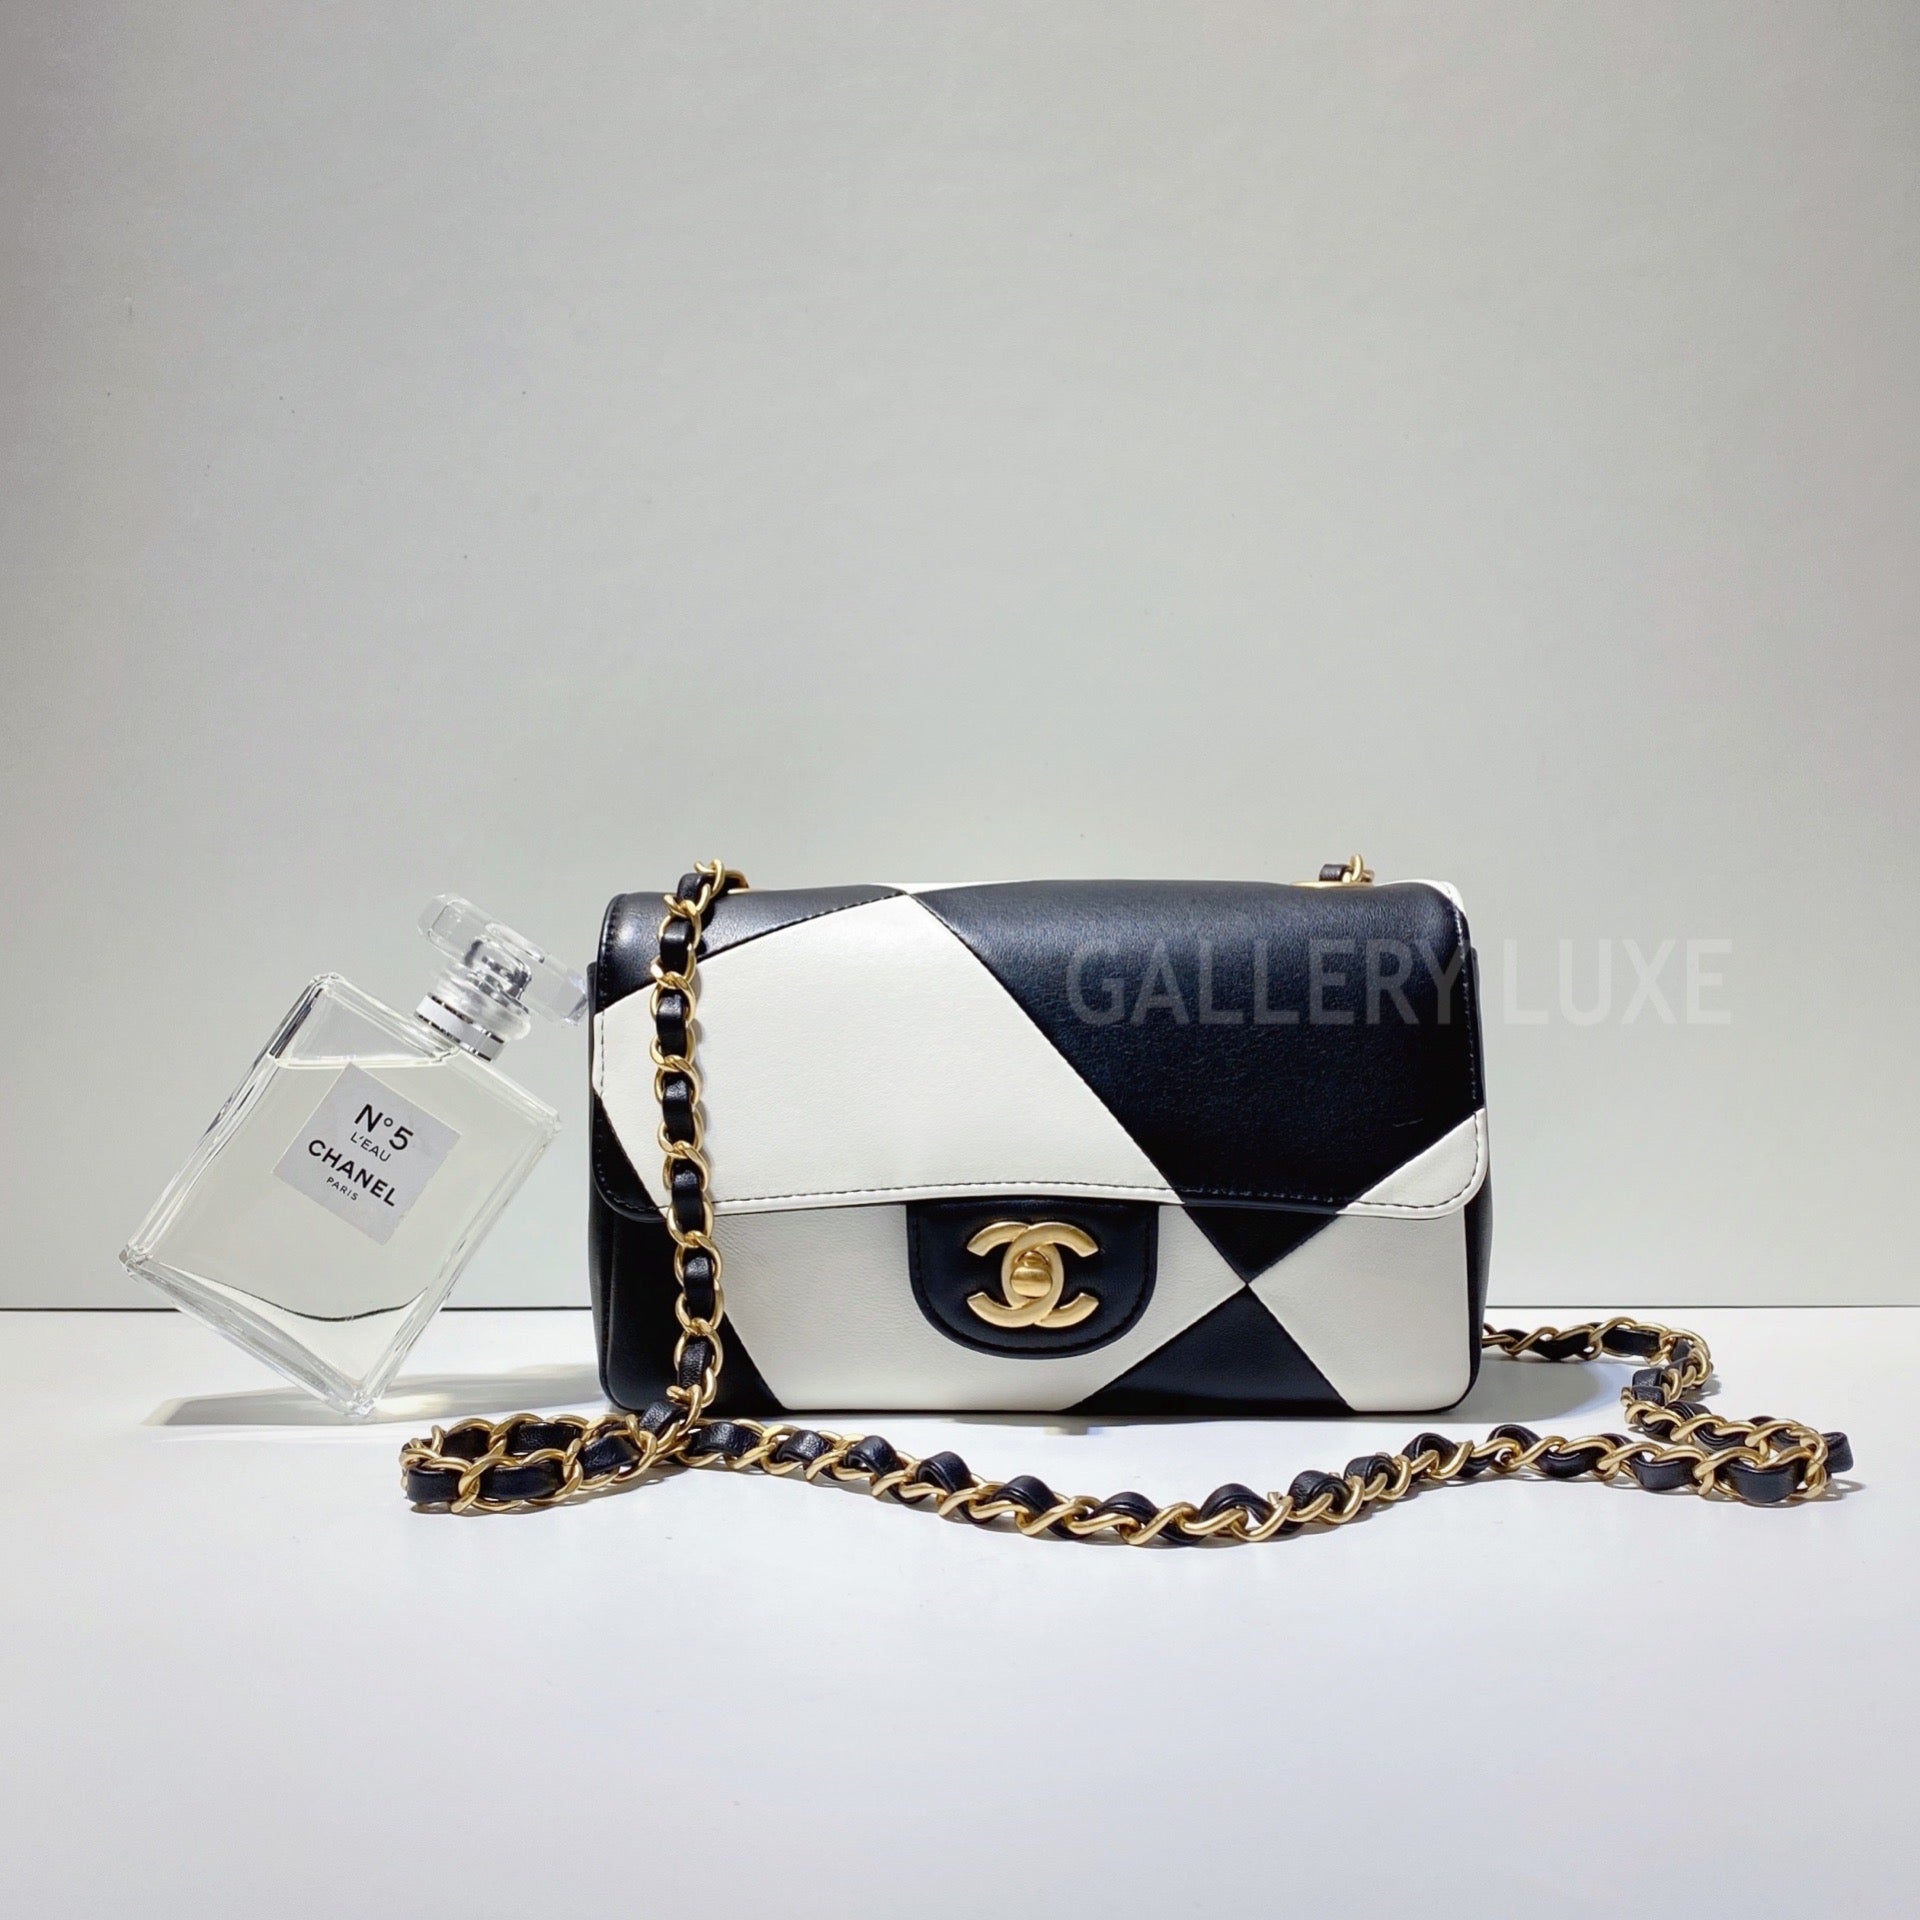 Singulier MTL - Extremely rare Chanel Timeless patchwork